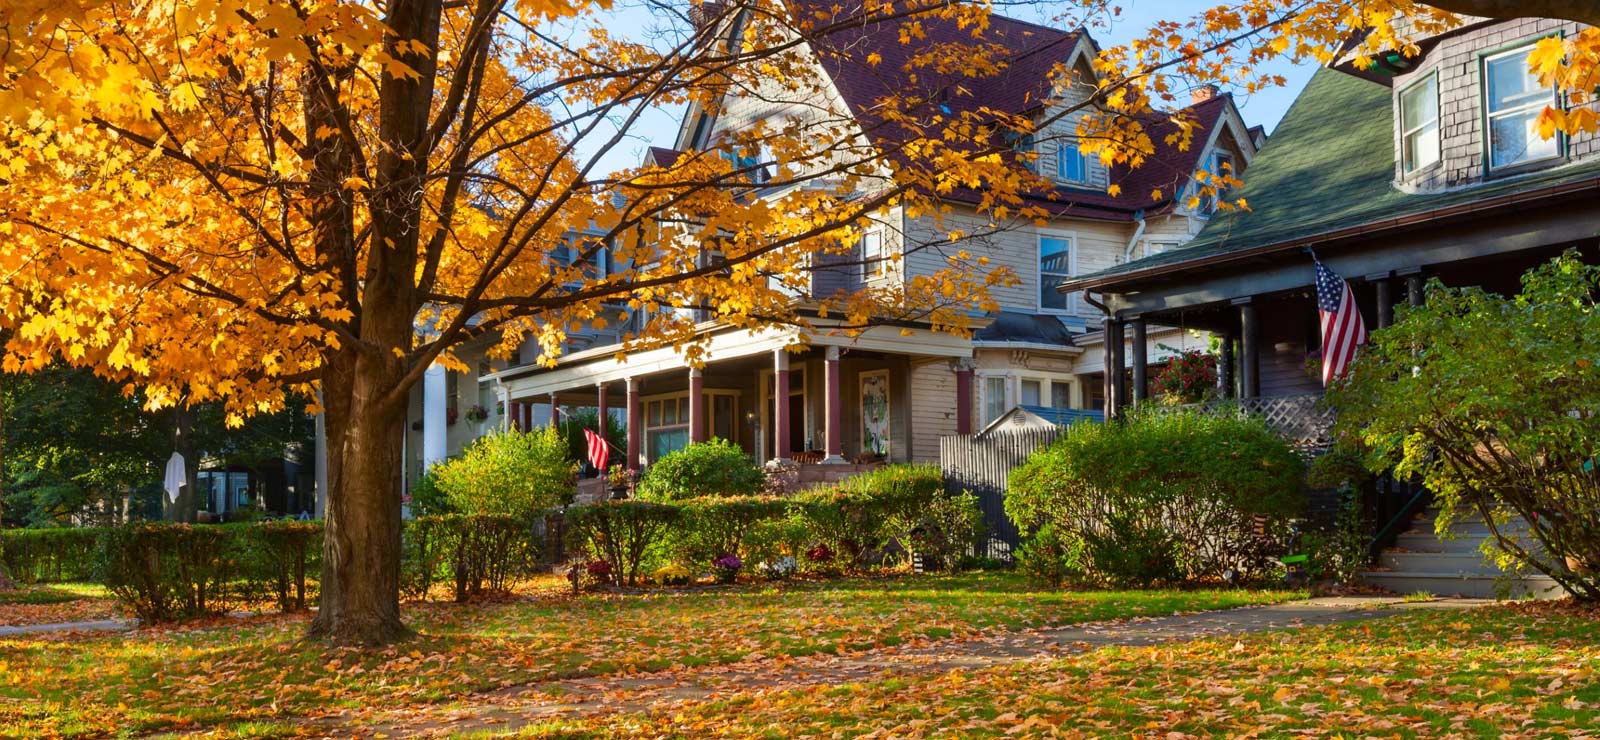 A picture of a house with shurbs and trees with fall colors